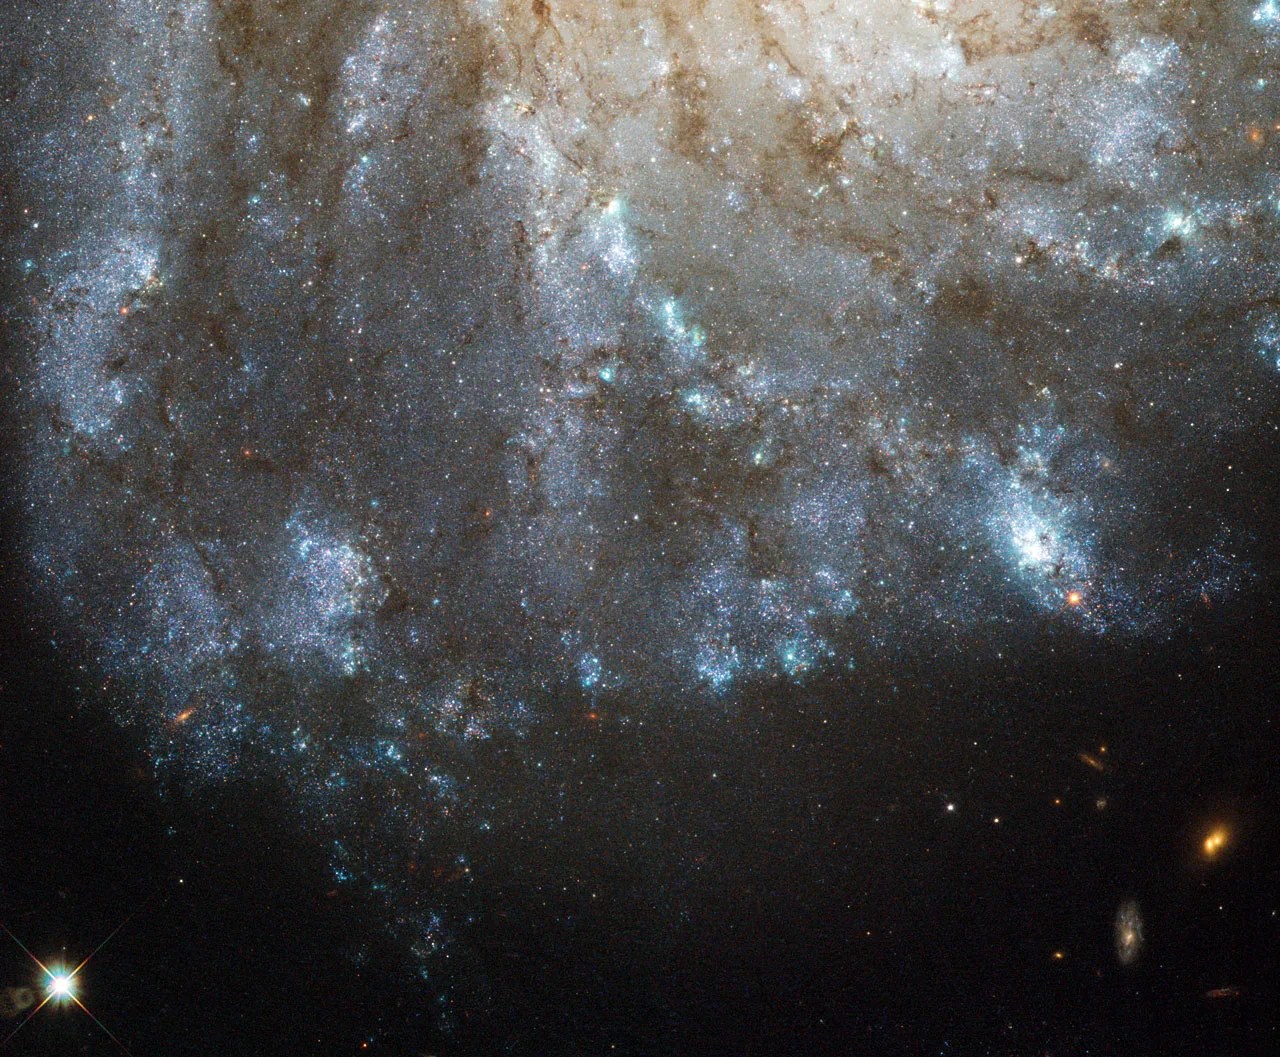 The nova is the yellow spot in the upper left corner of this image of the edge of galaxy M-99